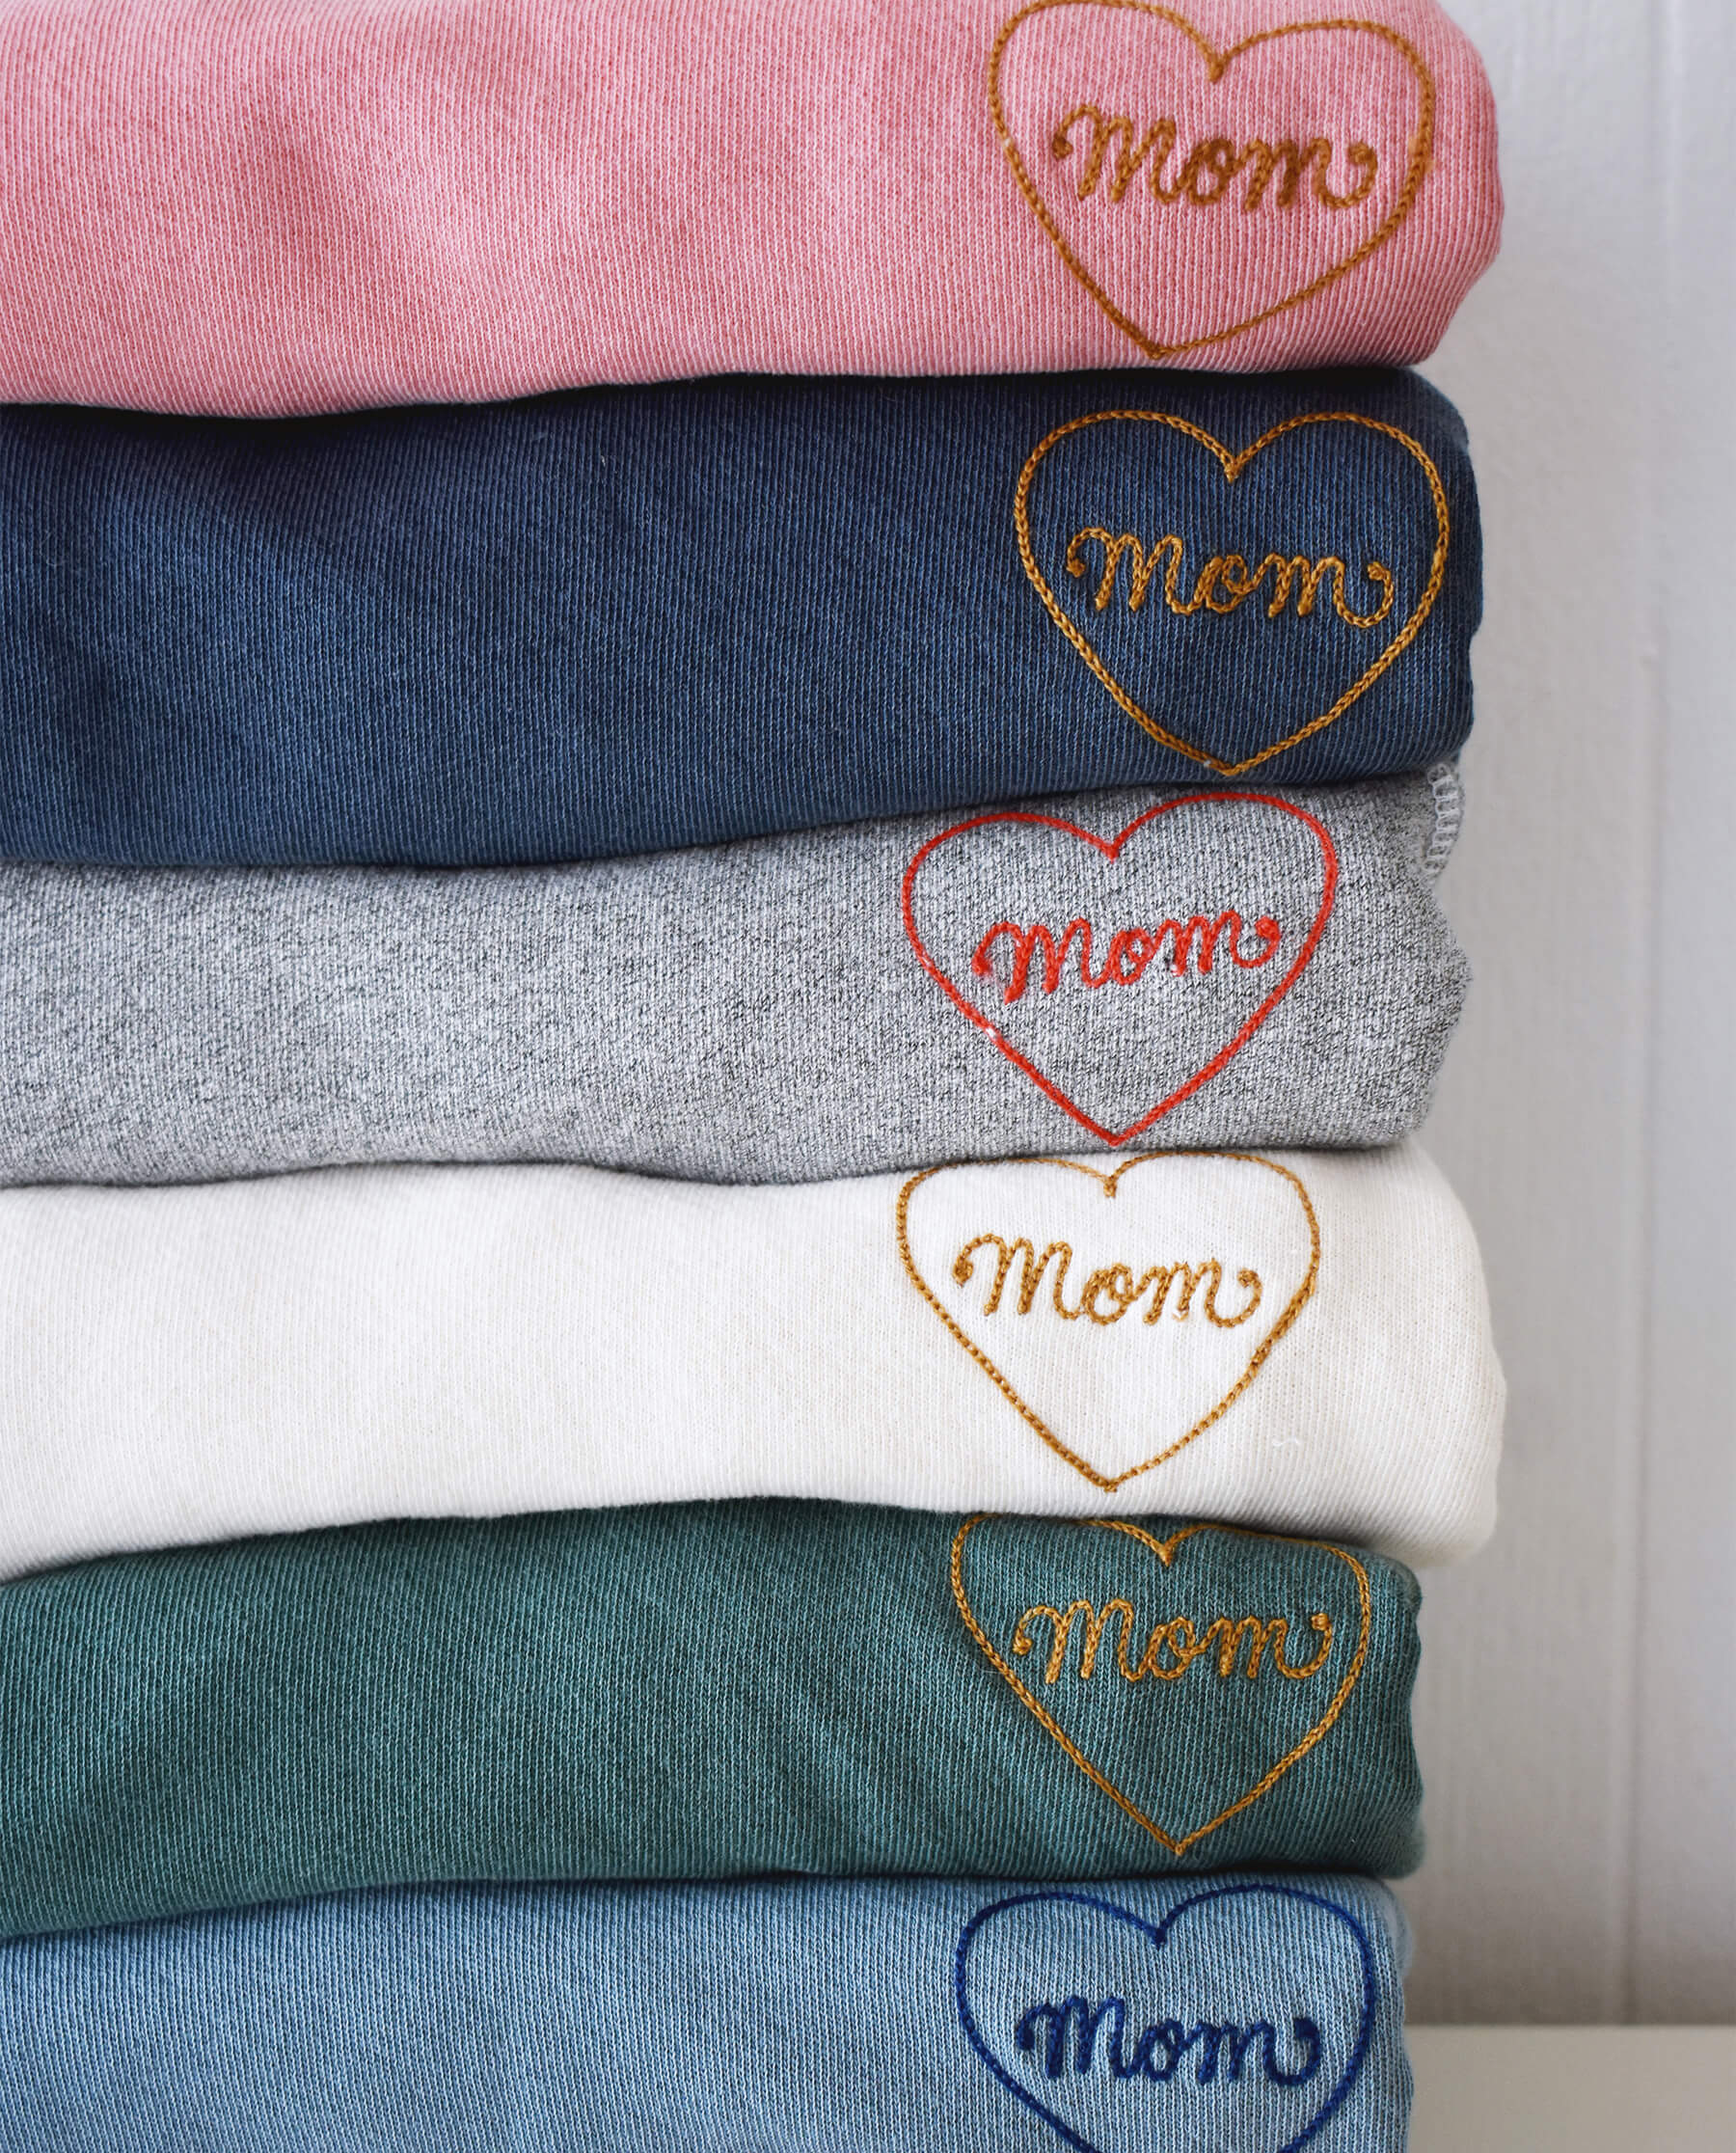 The Mom Embroidered College Sweatshirt. -- Strawberry Tart with Cream SWEATSHIRTS THE GREAT. SP23 MOM